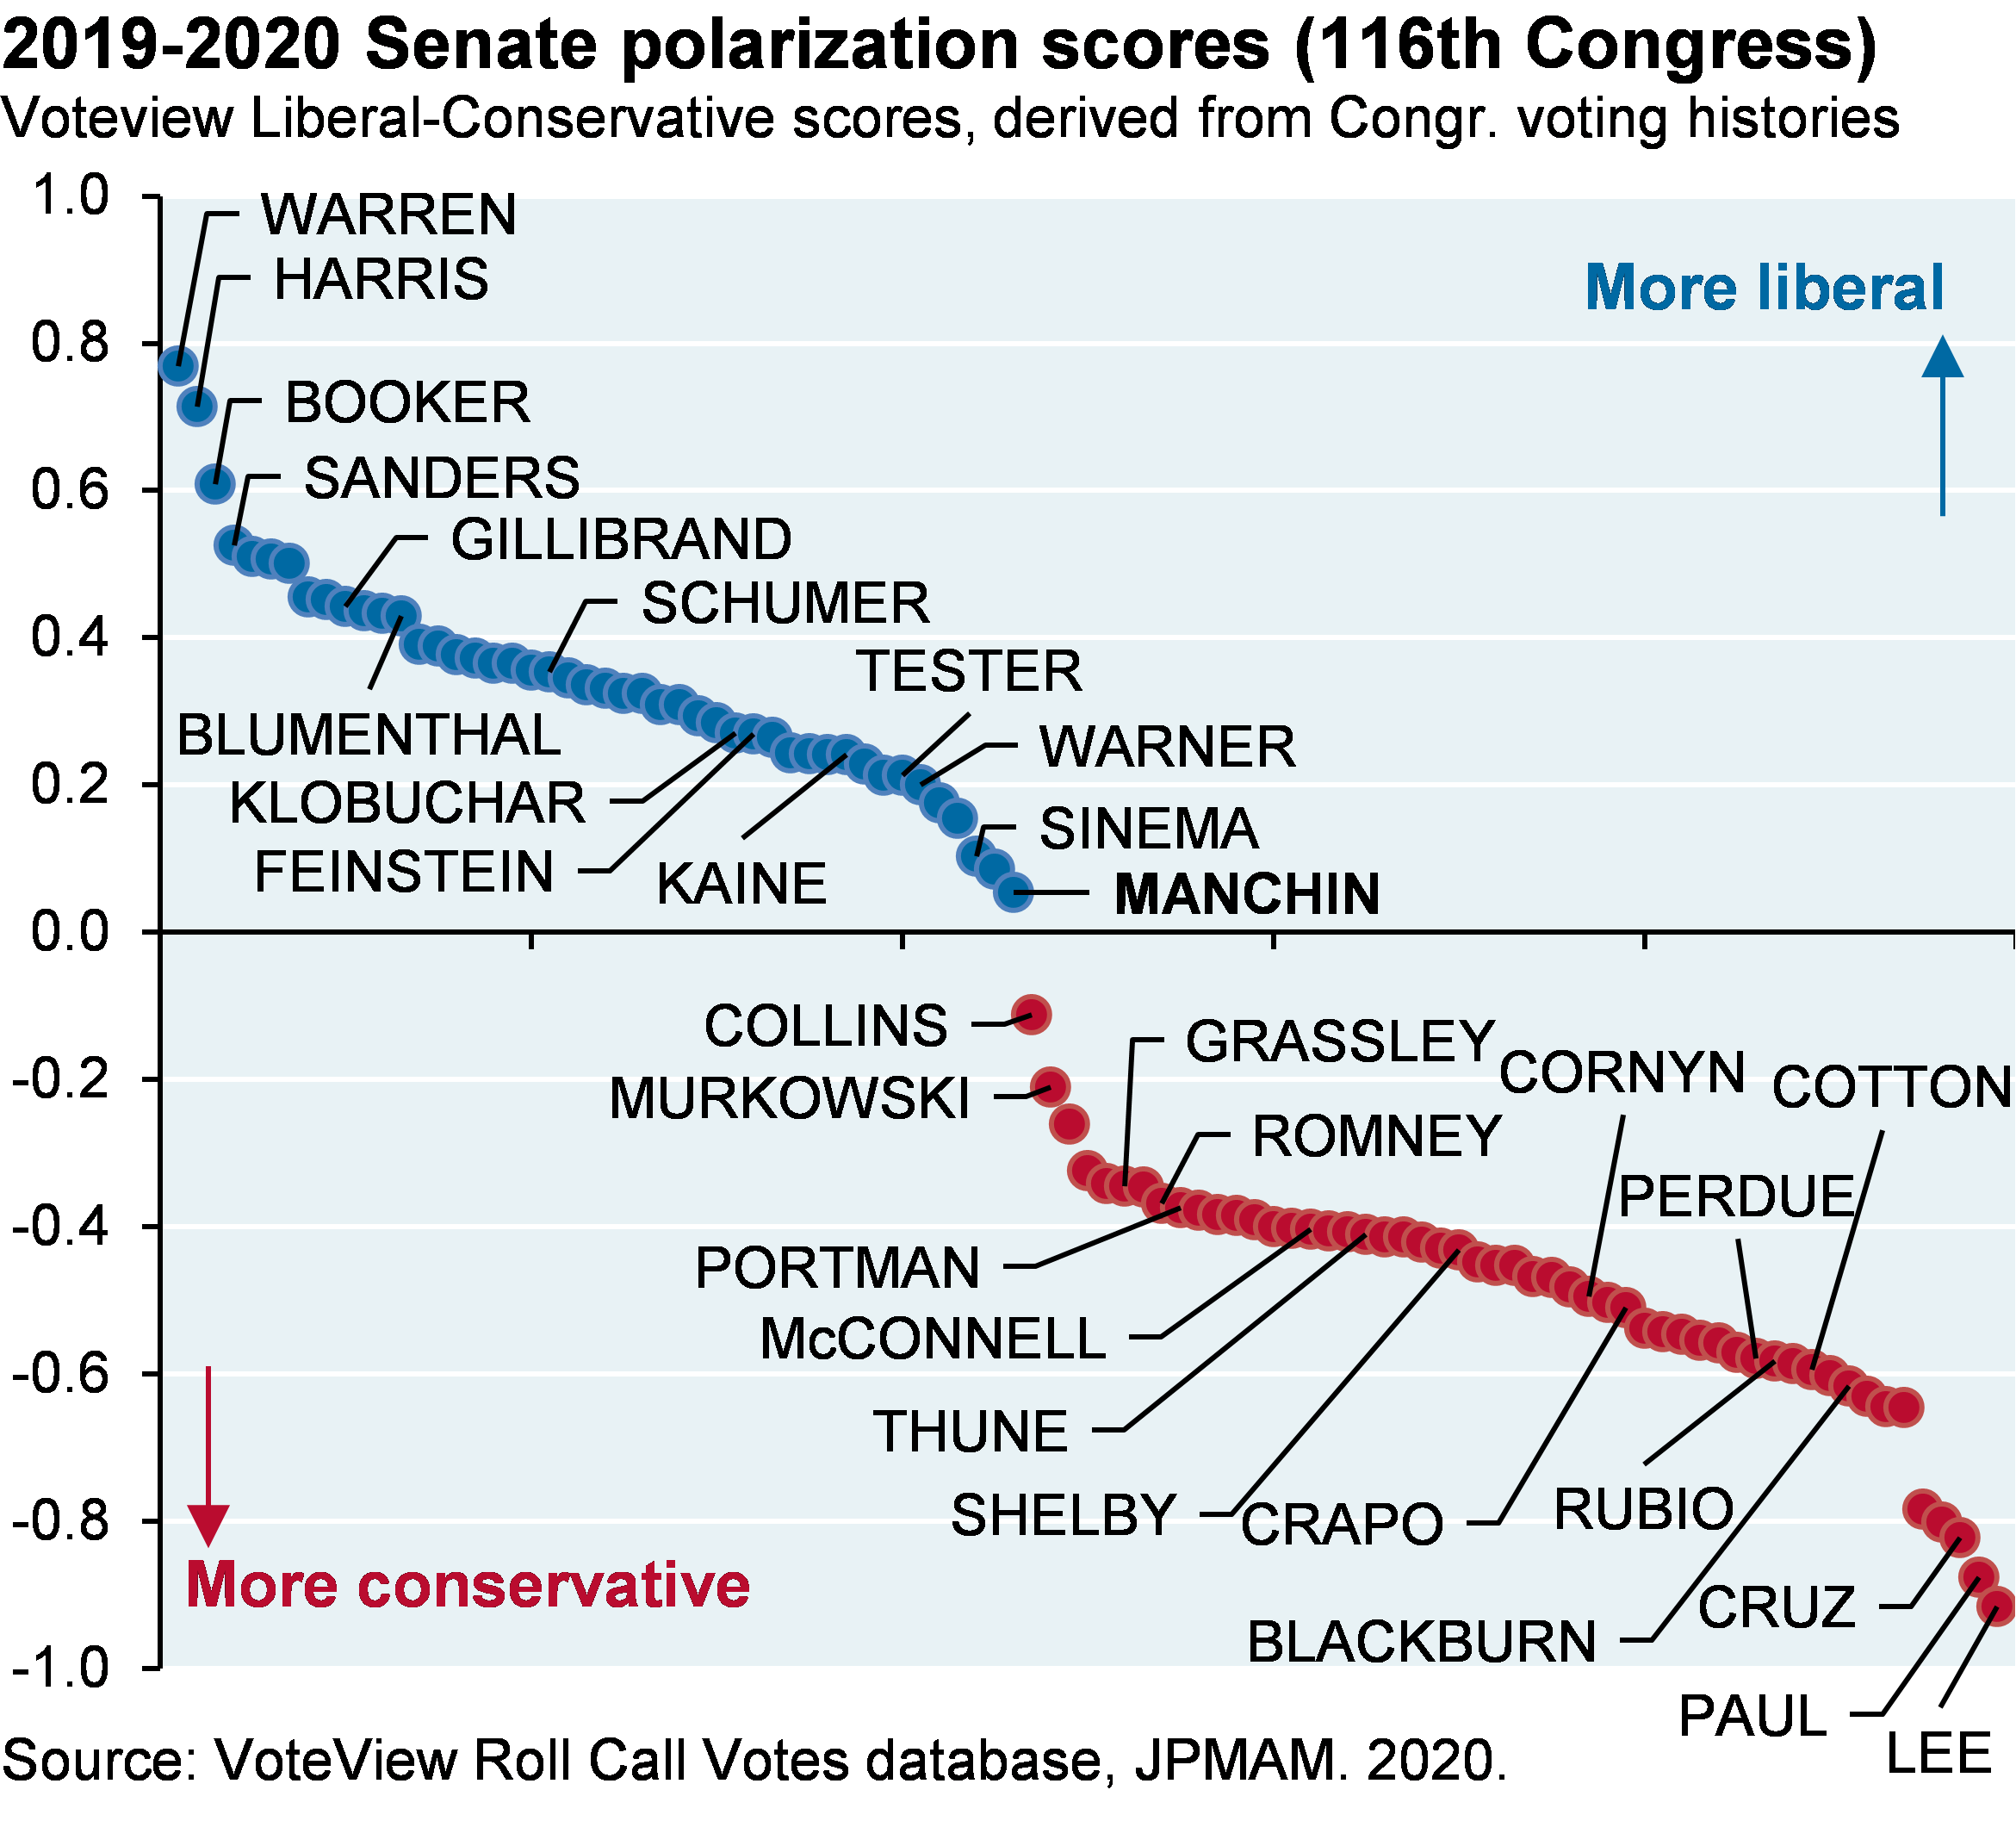 Dot plot chart showing 2019-2020 senate polarization scores for the 116th congress, with higher positive scores indicating senators are more liberal and lower negative scores indicating senators are more conservative. The chart highlights Manchin as having a score slightly above 0, indicating the senator is the most moderate of the liberal senators. 